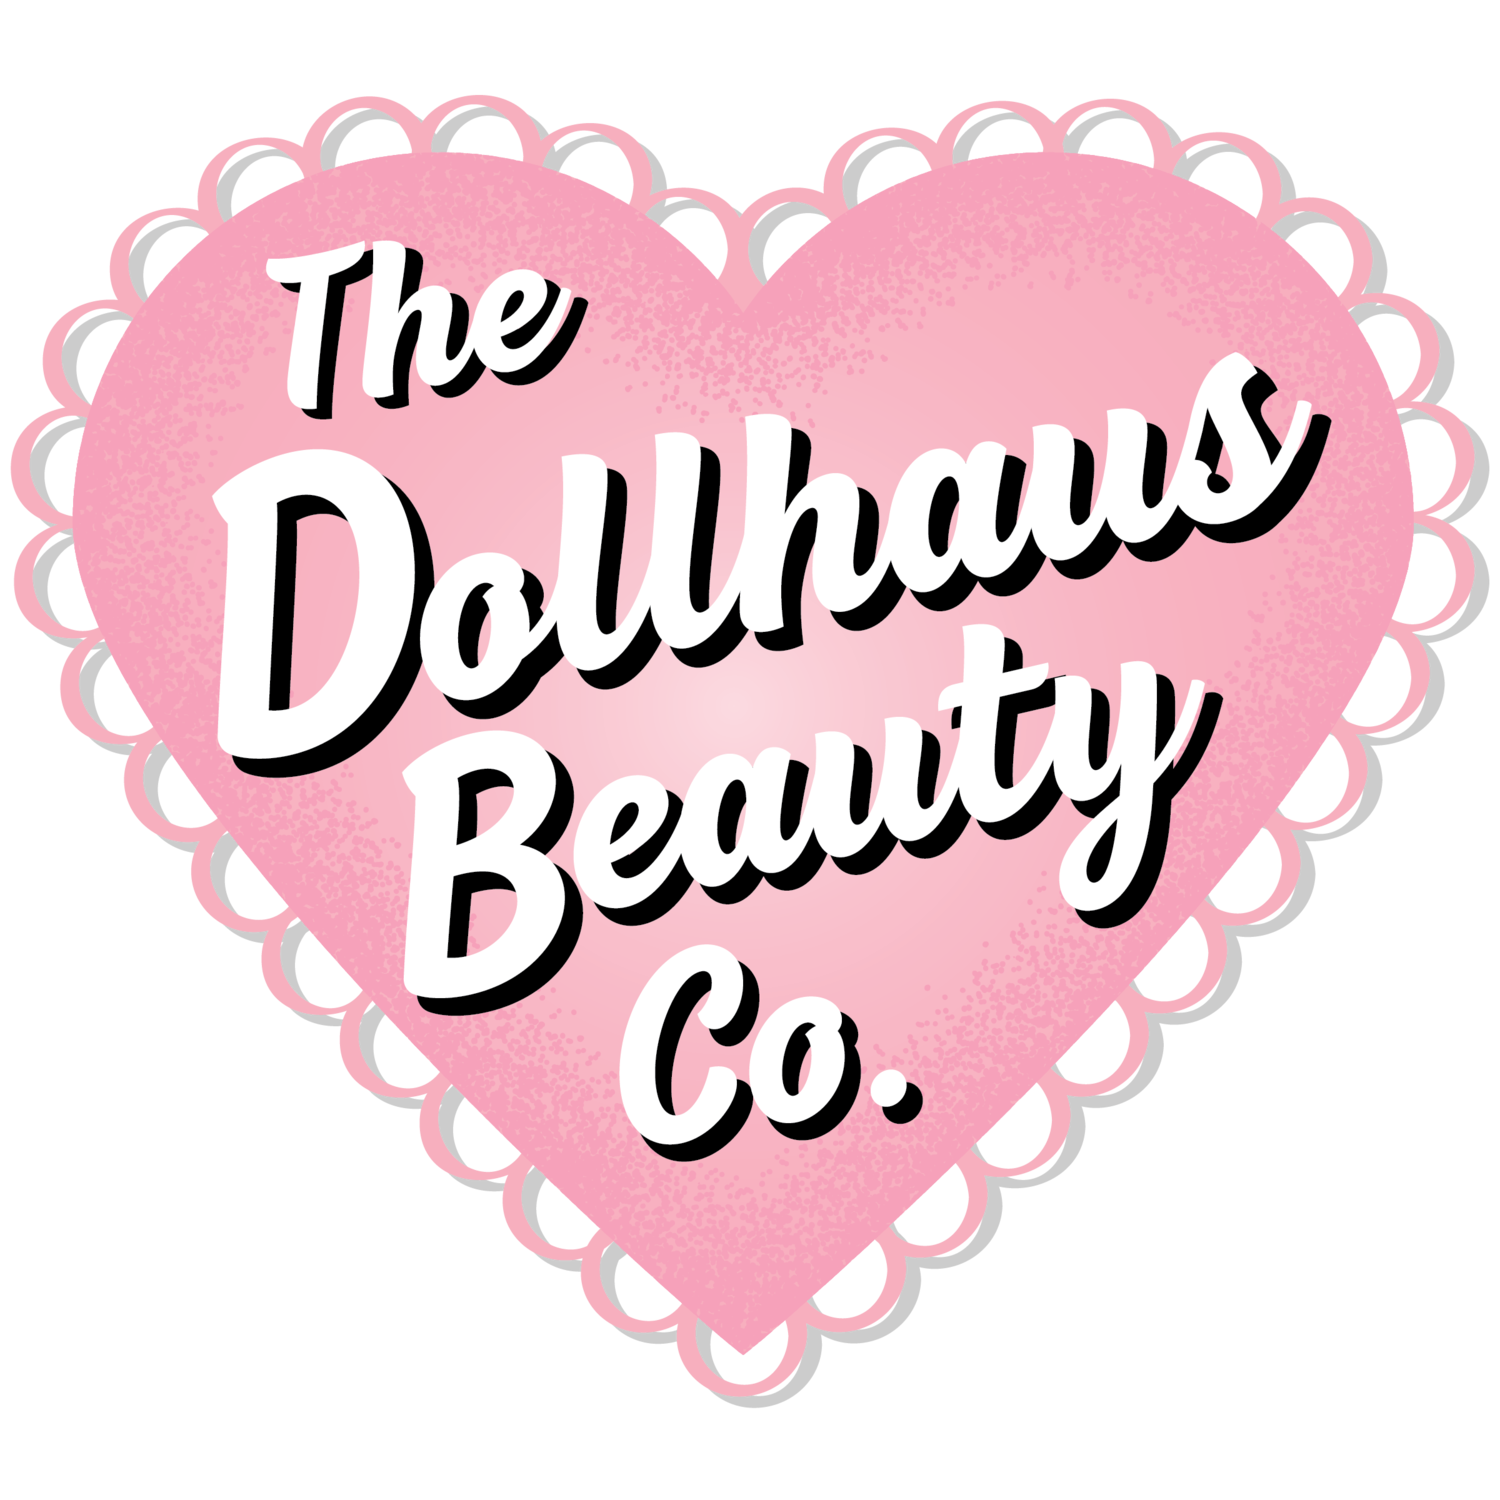 The Dollhaus Beauty Co.